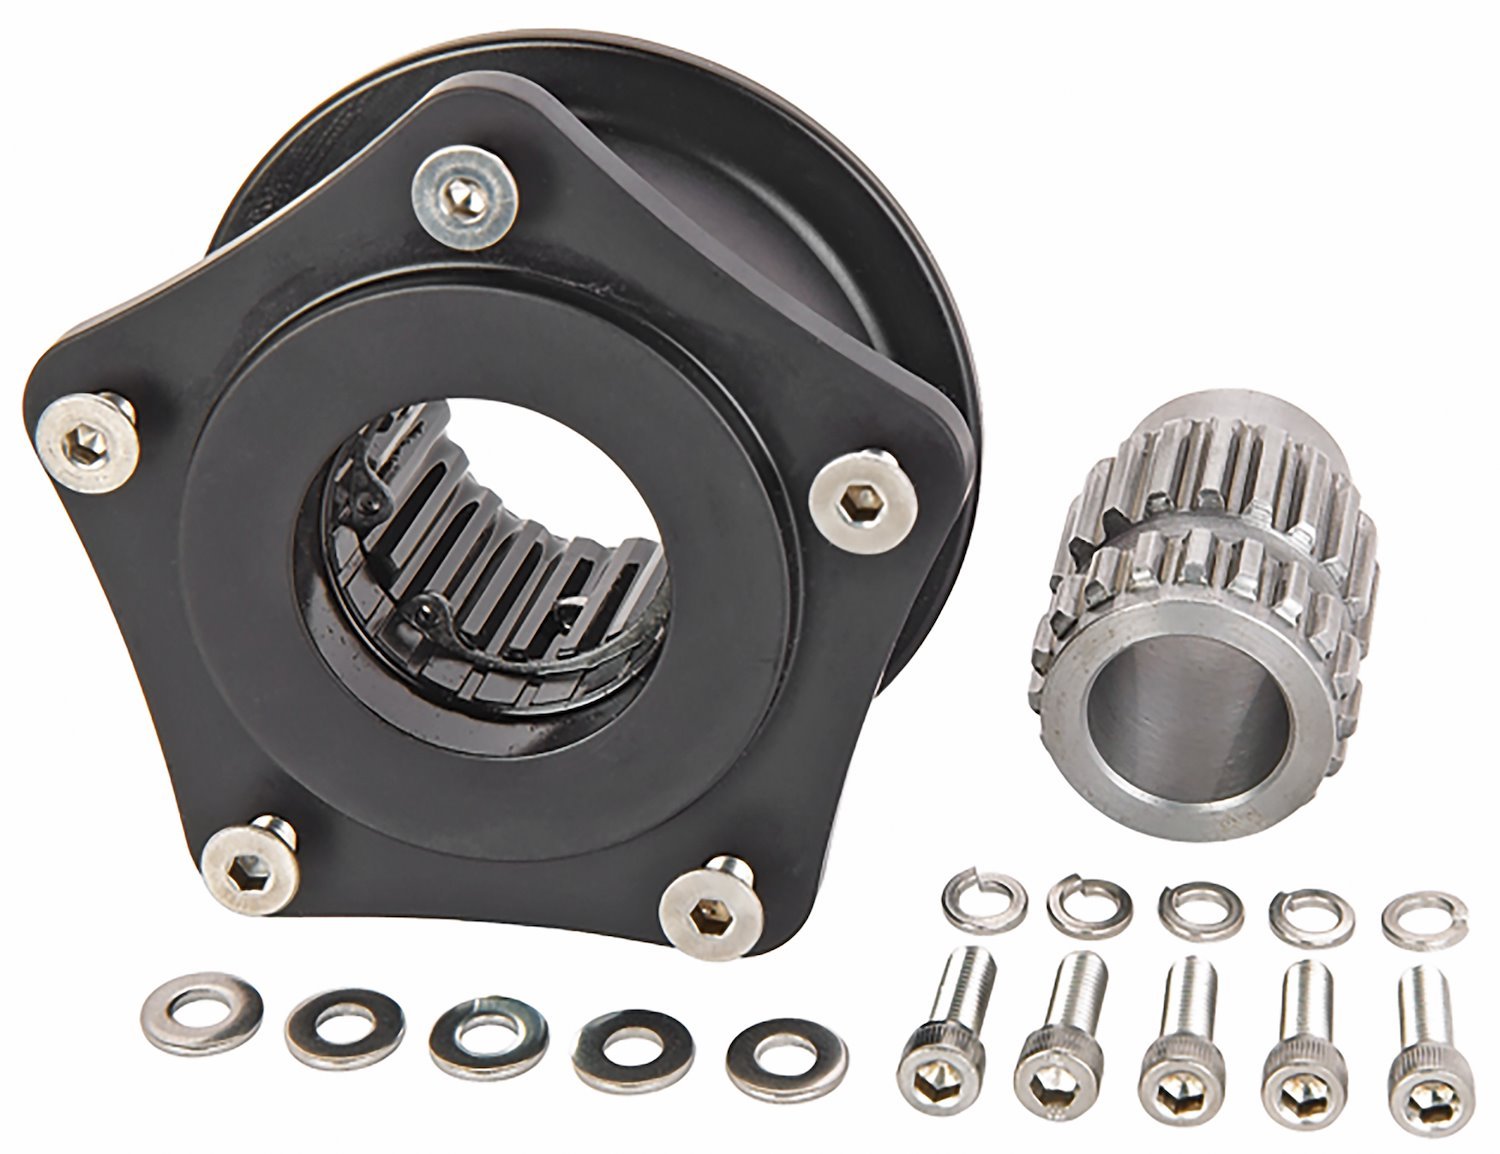 Quick-Release Weld-On Pinless-Type Steering Wheel Hub Kit for 5-Bolt Steering Wheels & 3/4 in. Steering Shaft [SFI 42.1]